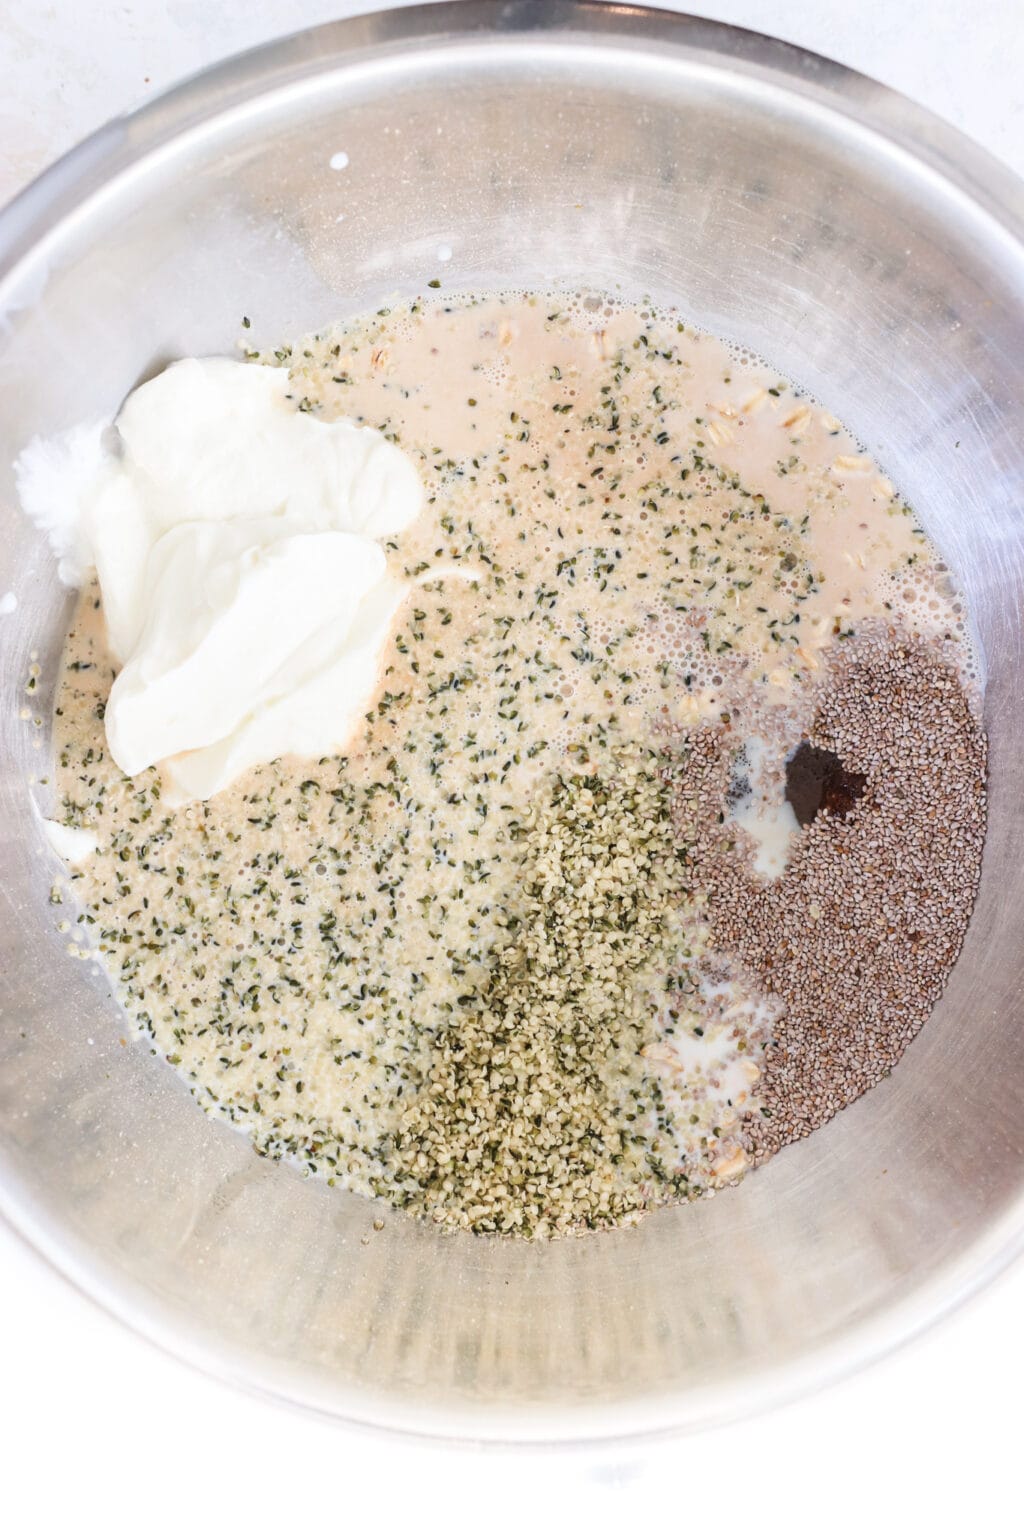 Ingredients for brown sugar and Greek yogurt overnight oats in a large bowl, including quick oats, hemp hearts, chia seeds, vanilla extract, milk, cinnamon, brown sugar, maple syrup, salt, and Greek yogurt